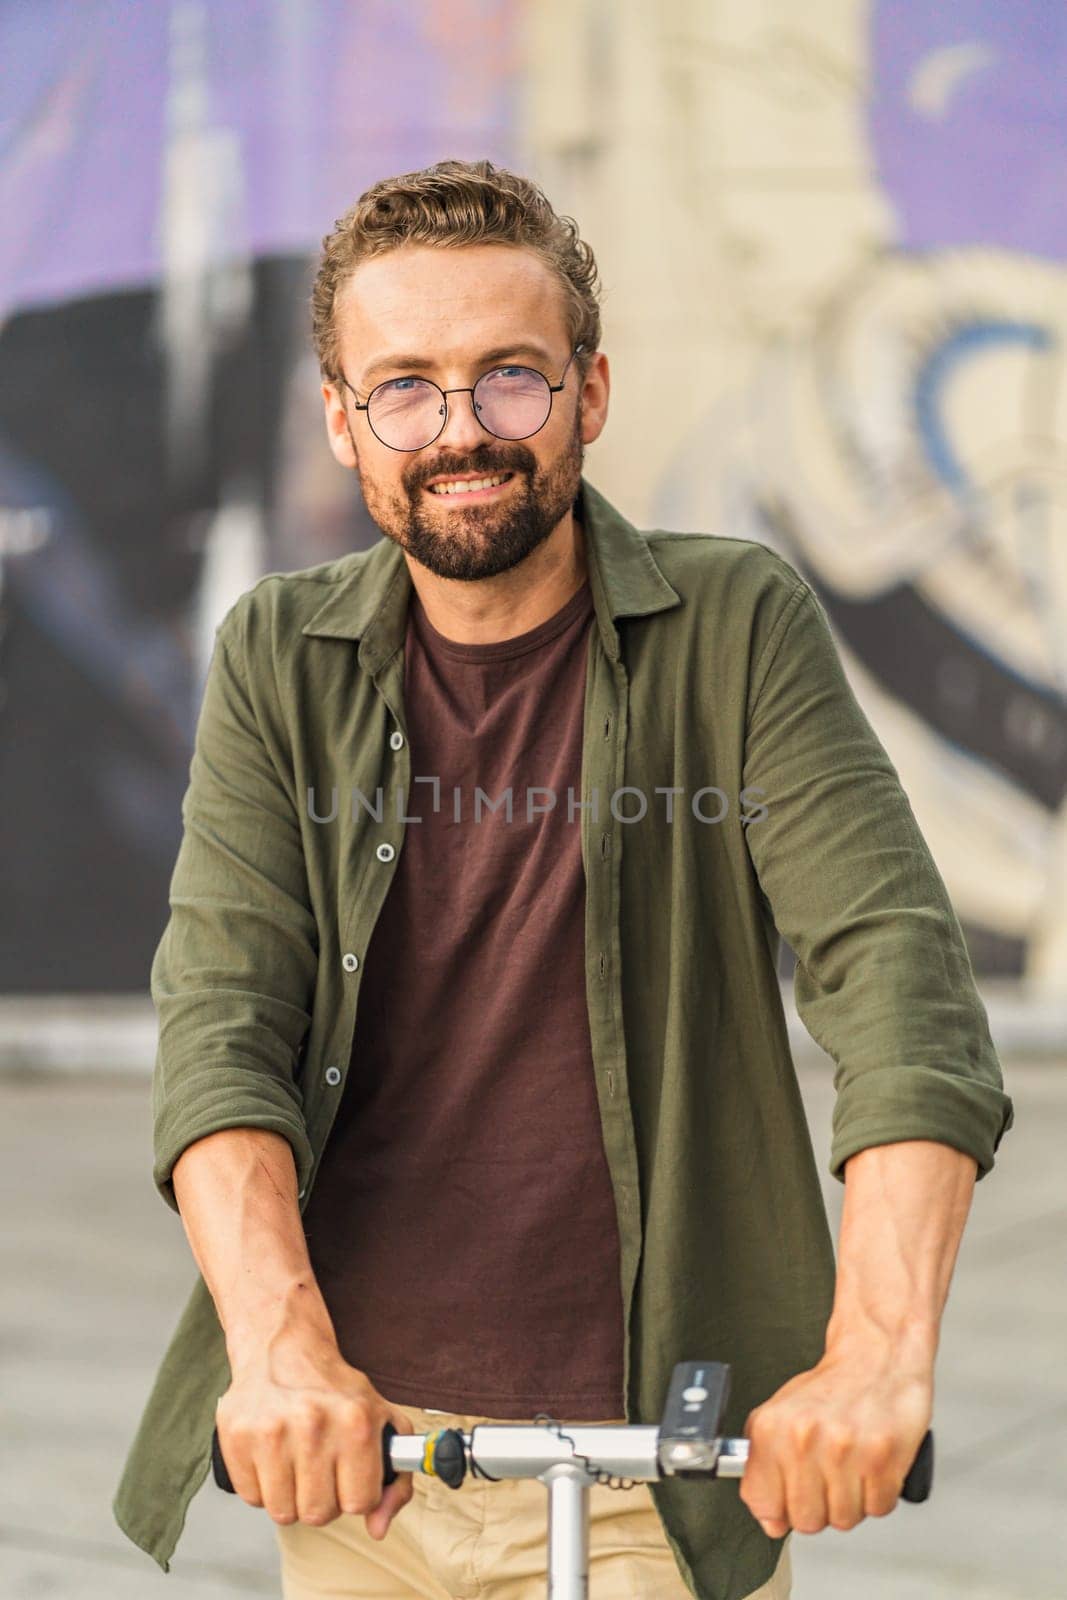 Man photographed outdoors, basking in natural sunlight. With confident and stylish appearance, he exudes relaxed and charismatic vibe. outdoor setting adds touch of authenticity and freshness to image. by LipikStockMedia